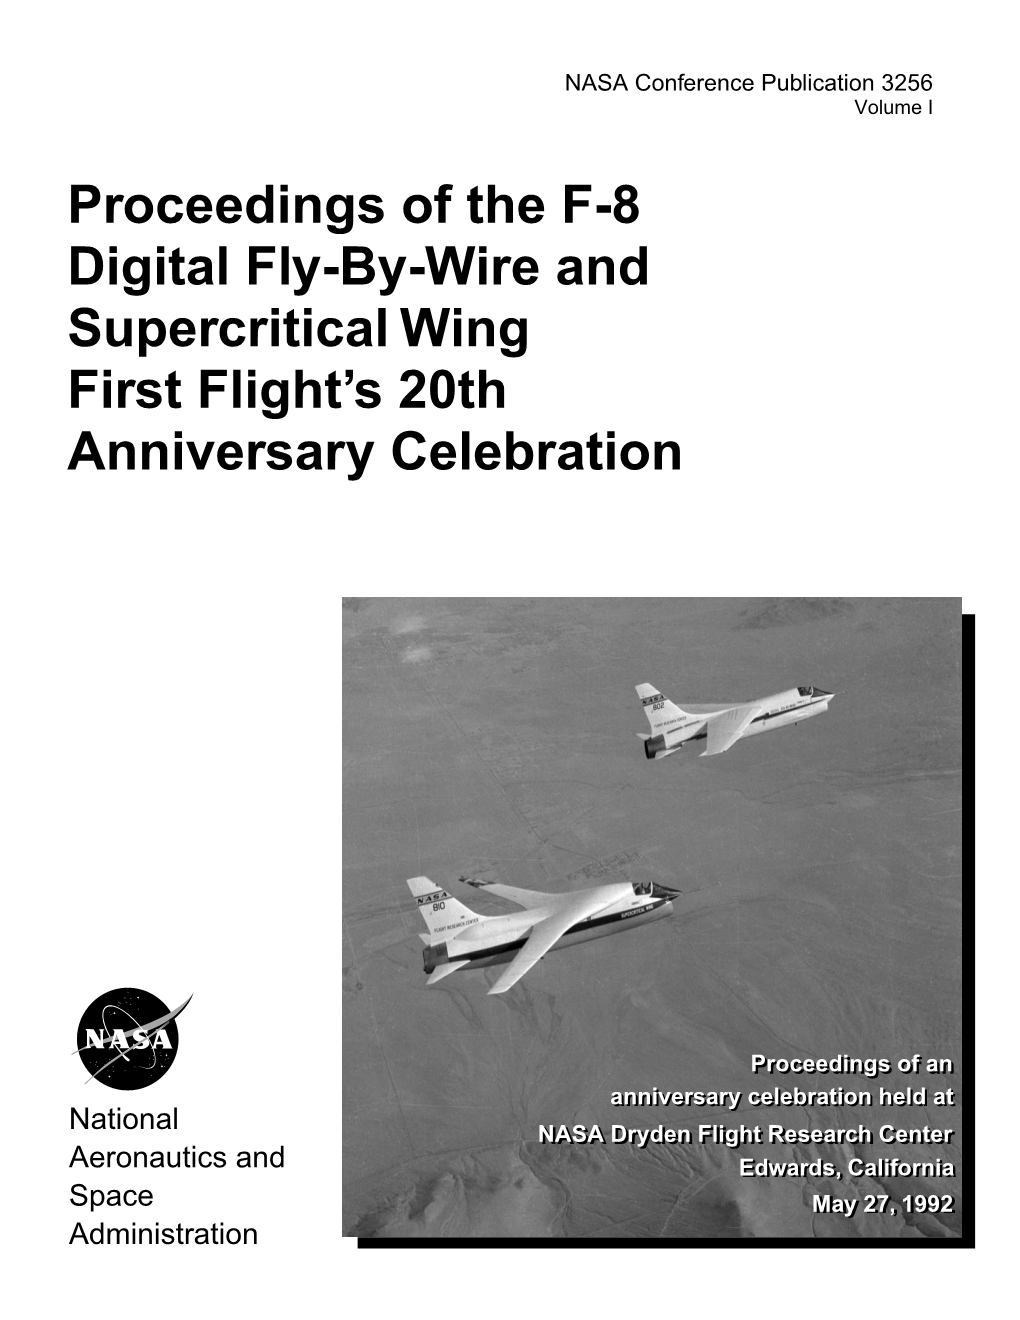 Proceedings of the F-8 Digital Fly-By-Wire and Supercritical Wing First Flight’S 20Th Anniversary Celebration